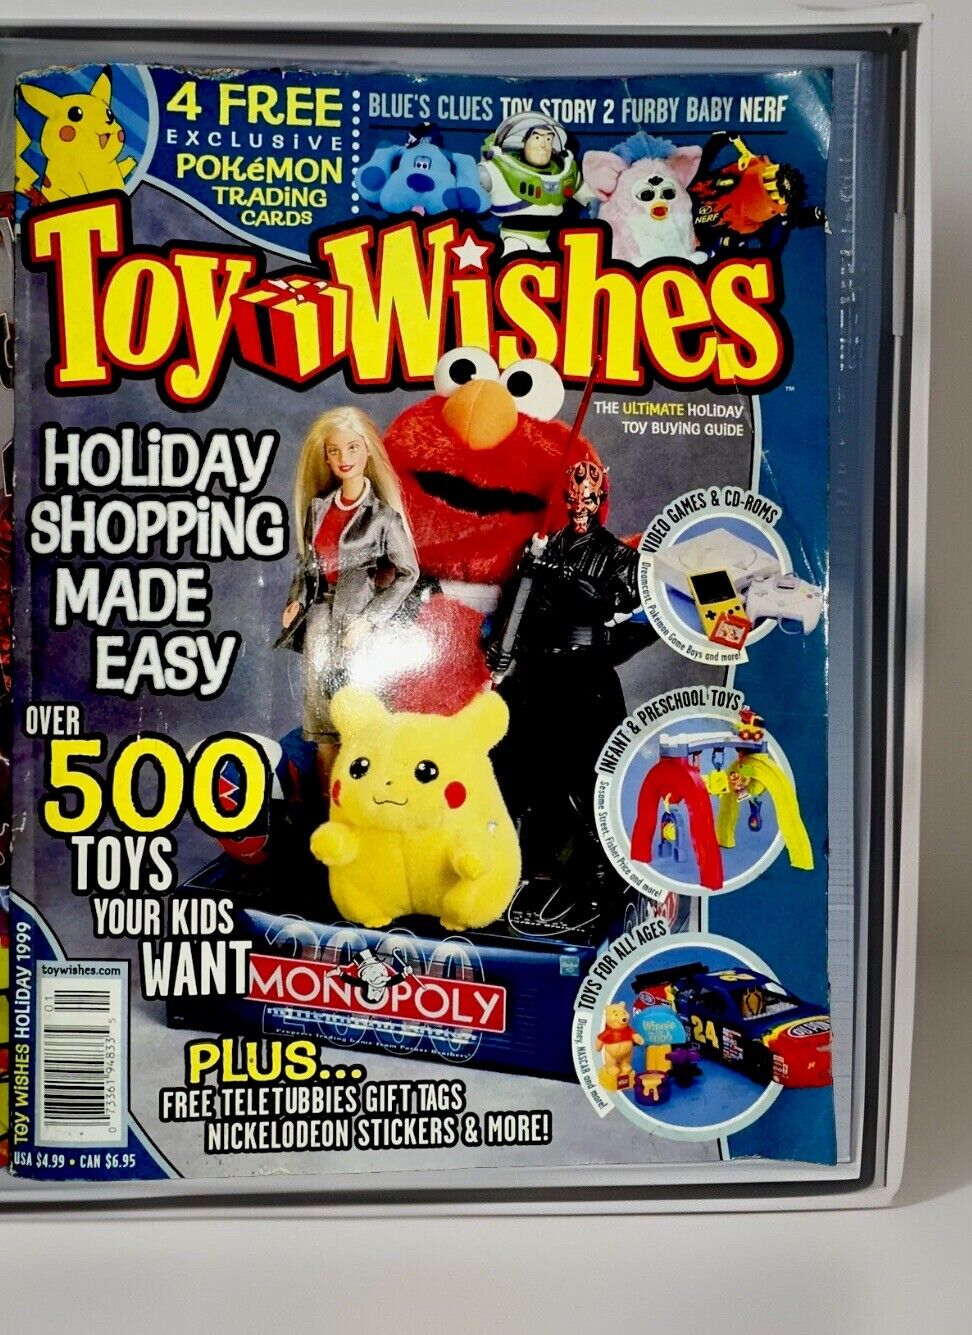 Toy Wishes Magazine 1999 with 4 Exclusive Pokémon Cards New/Not Cut And More